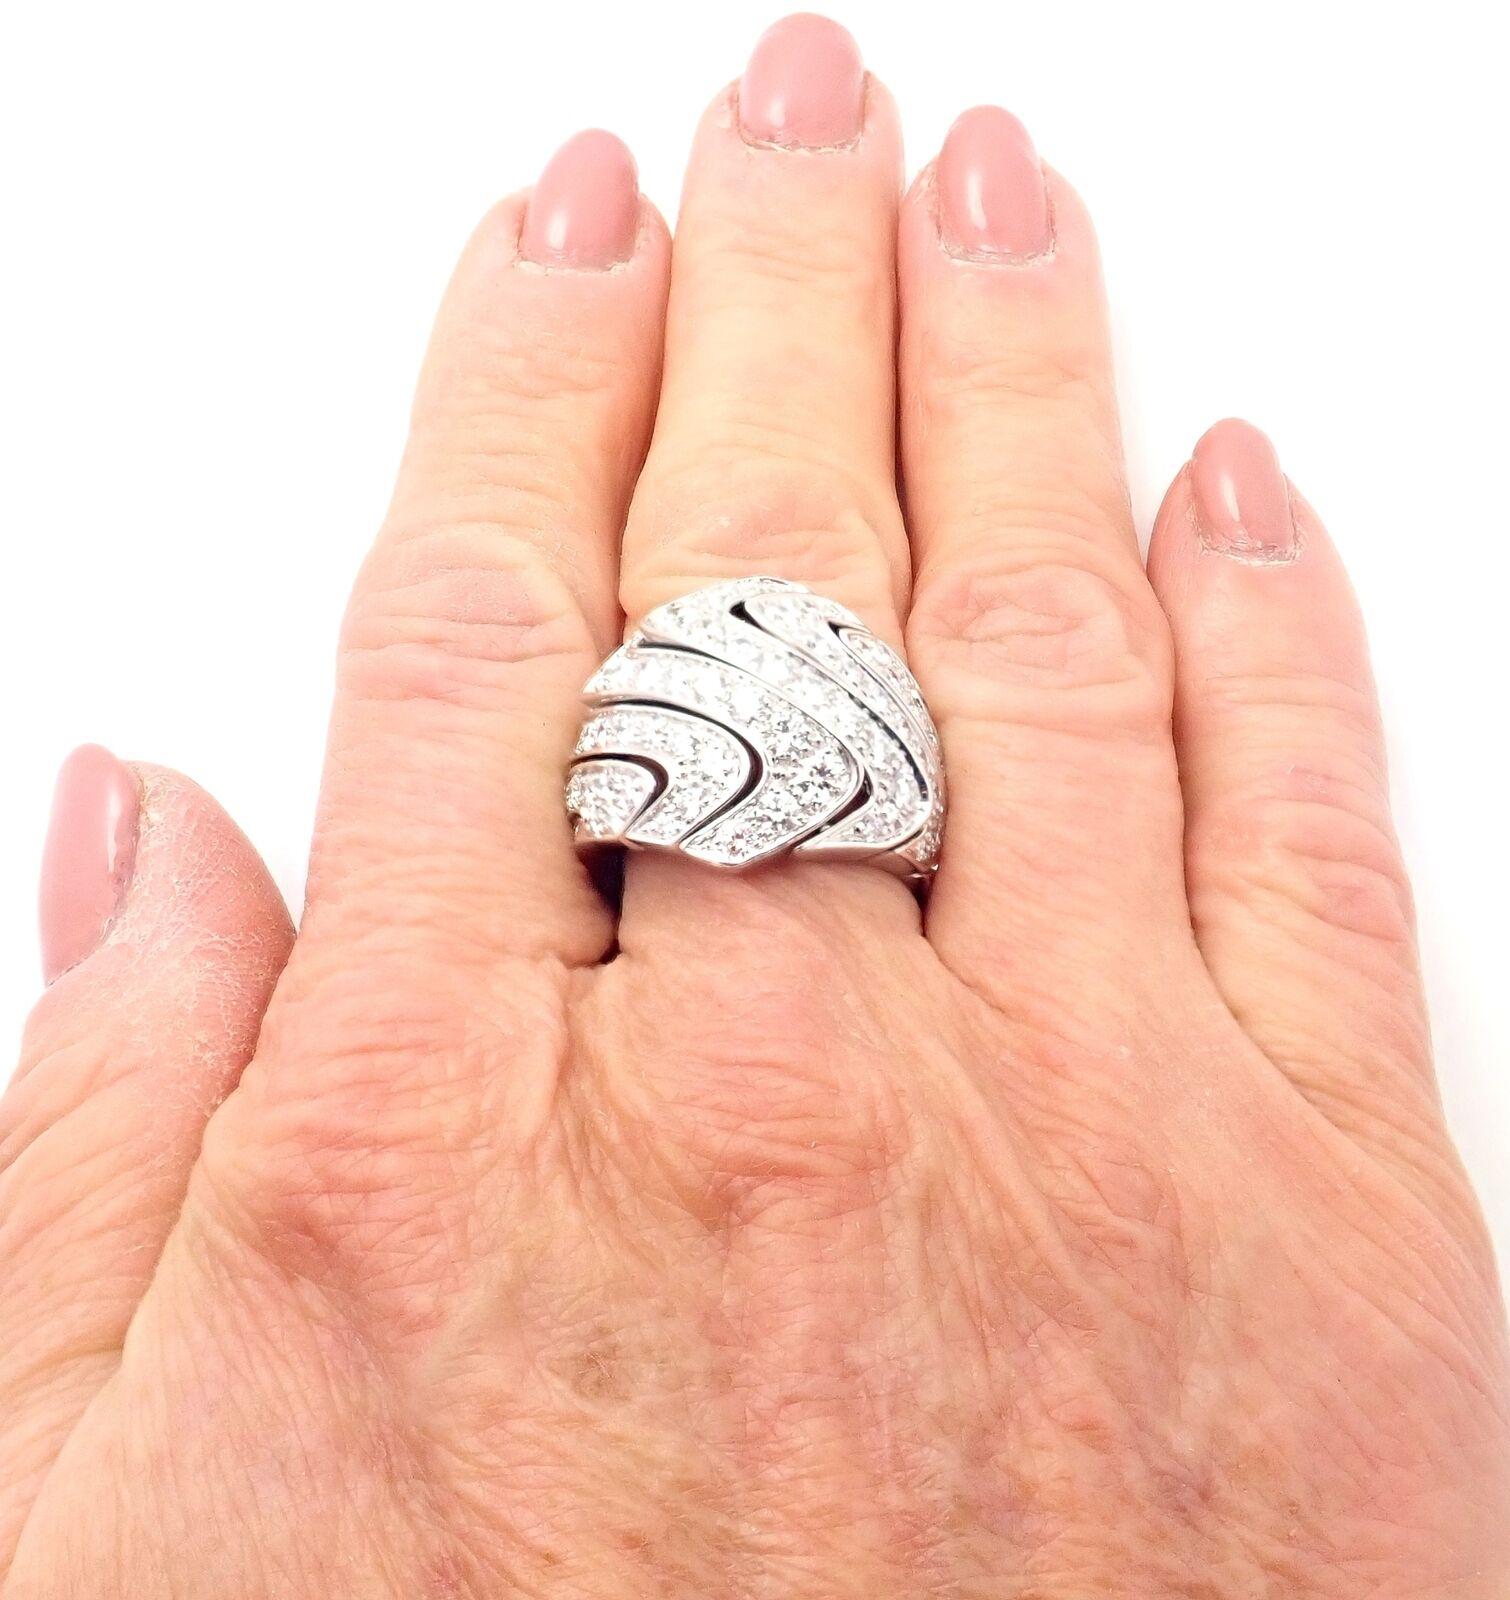 Cartier Diamond Waves Large White Gold Ring In Excellent Condition For Sale In Holland, PA